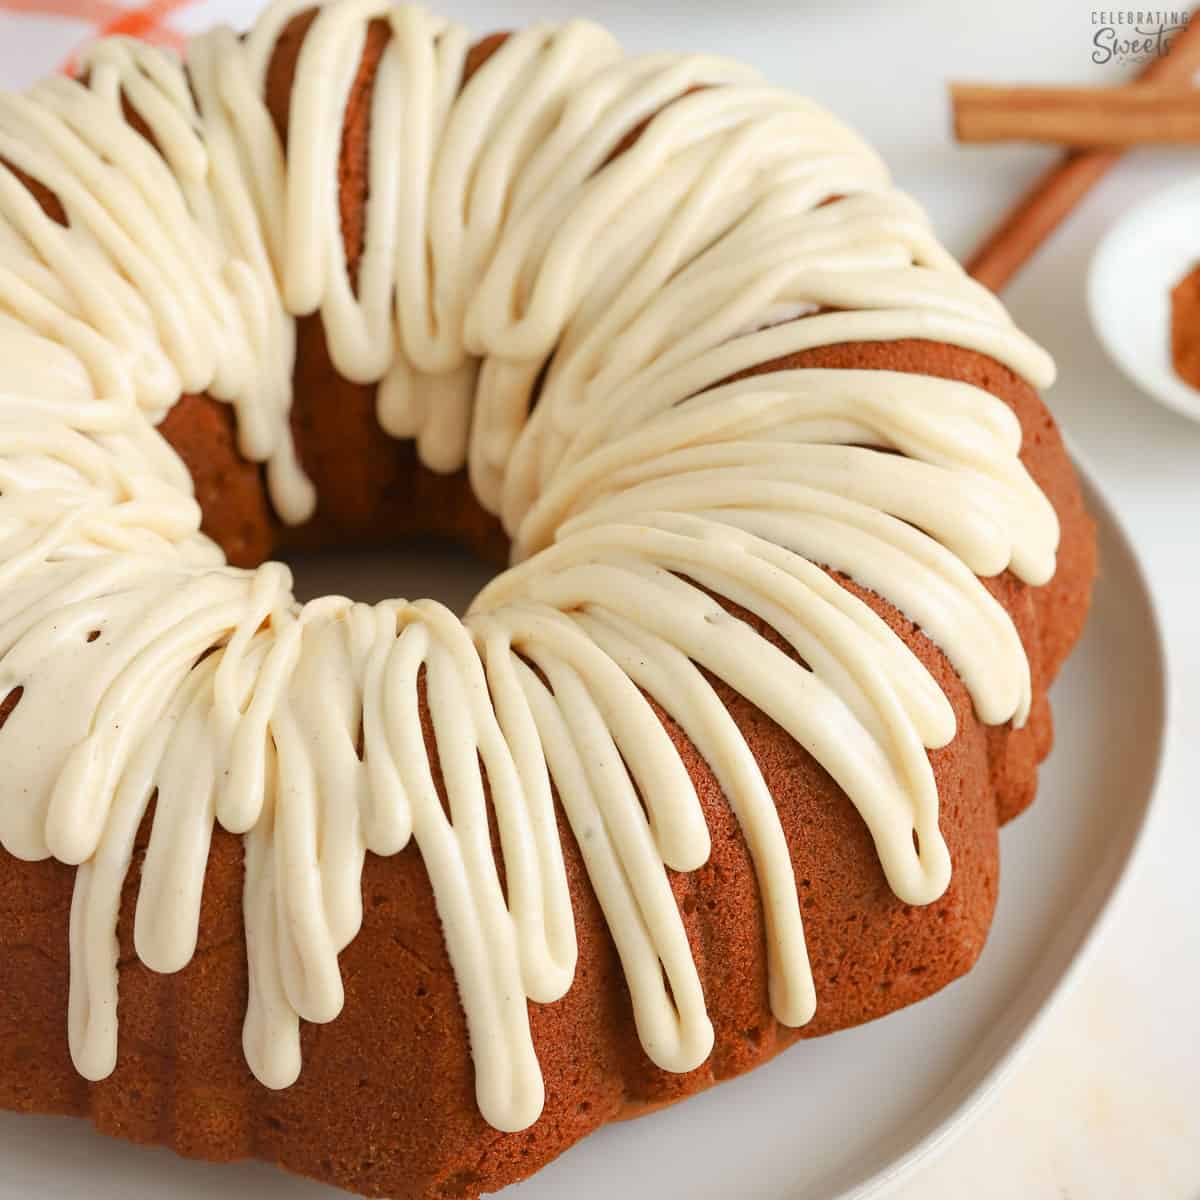 Pumpkin Bundt Cake with Cake Mix and Cream Cheese Frosting